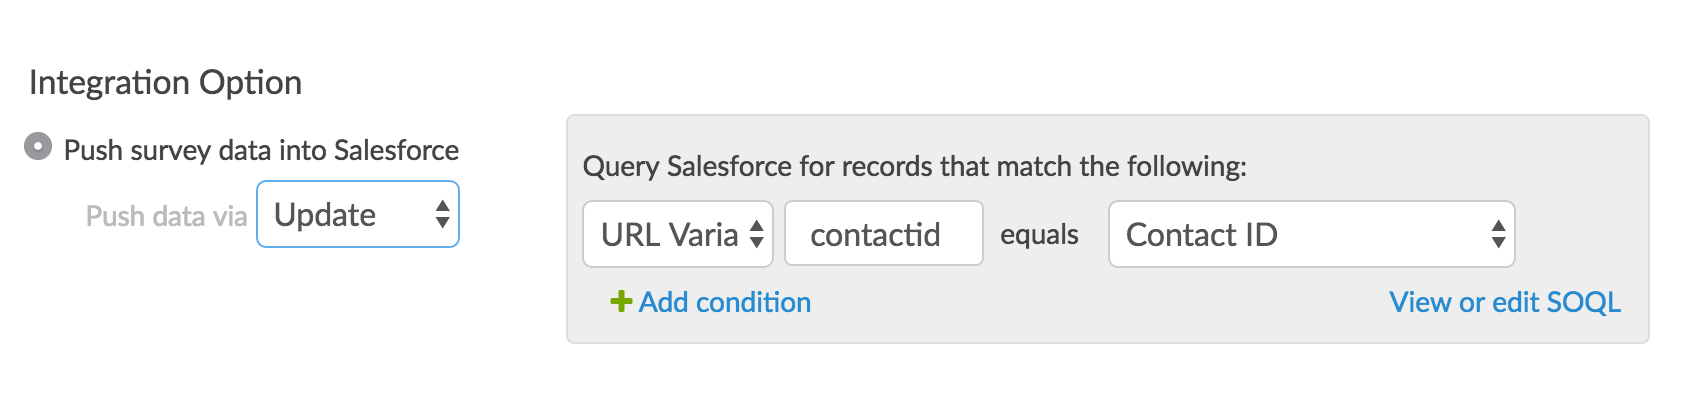 Identify the survey field that contains the unique Salesforce ID